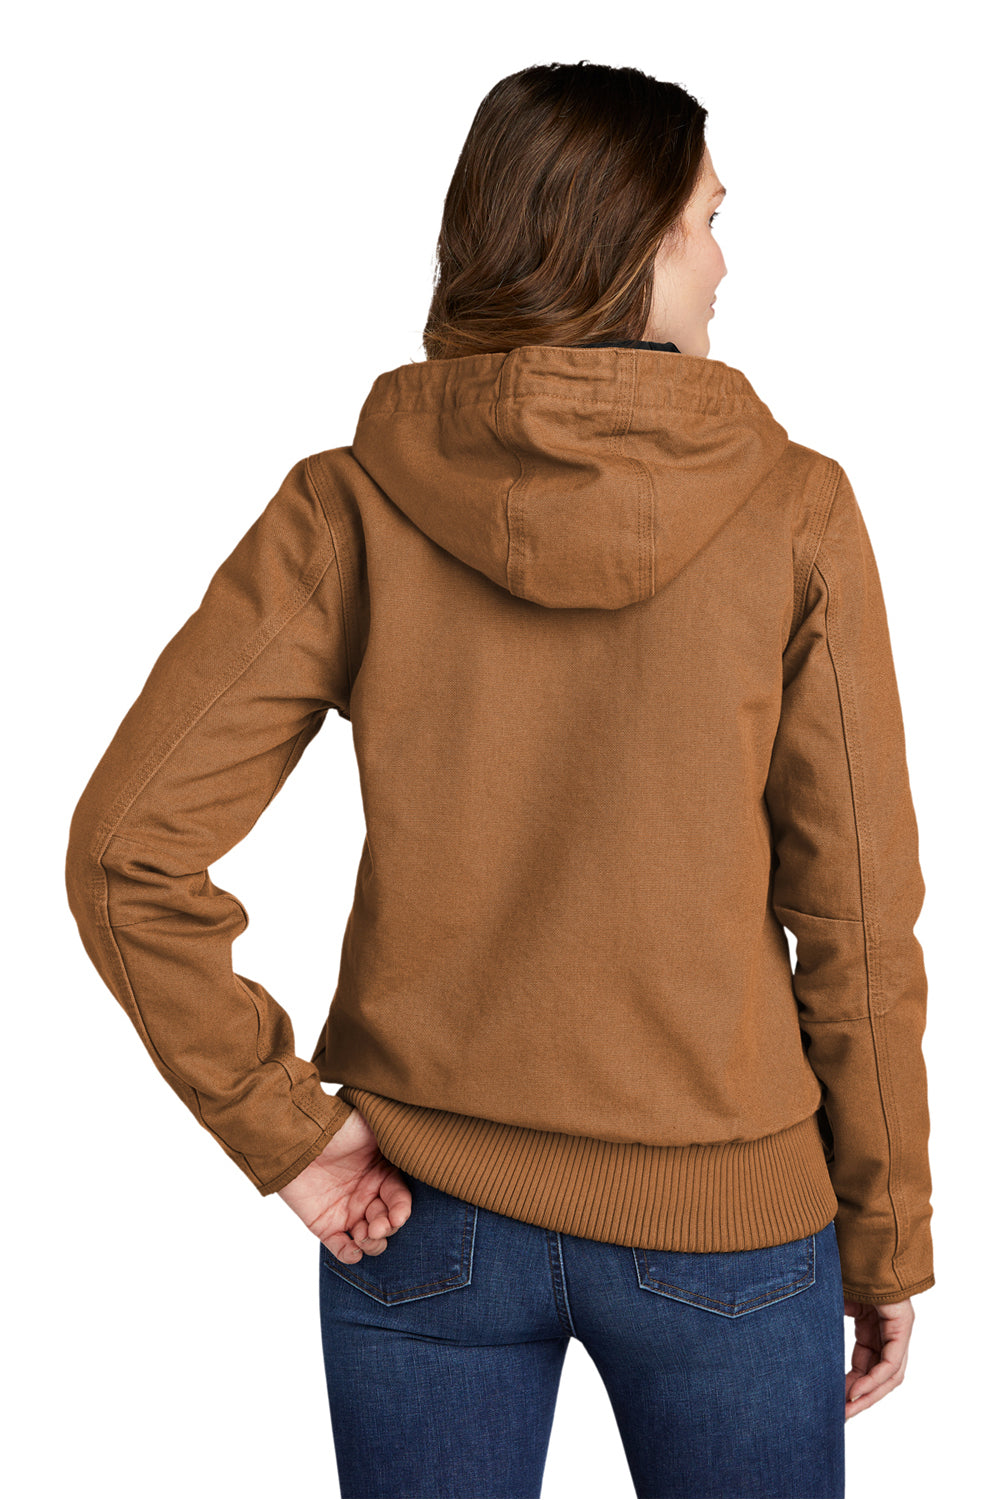 Carhartt CT104053 Womens Active Washed Duck Full Zip Hooded Jacket Carhartt Brown Model Back